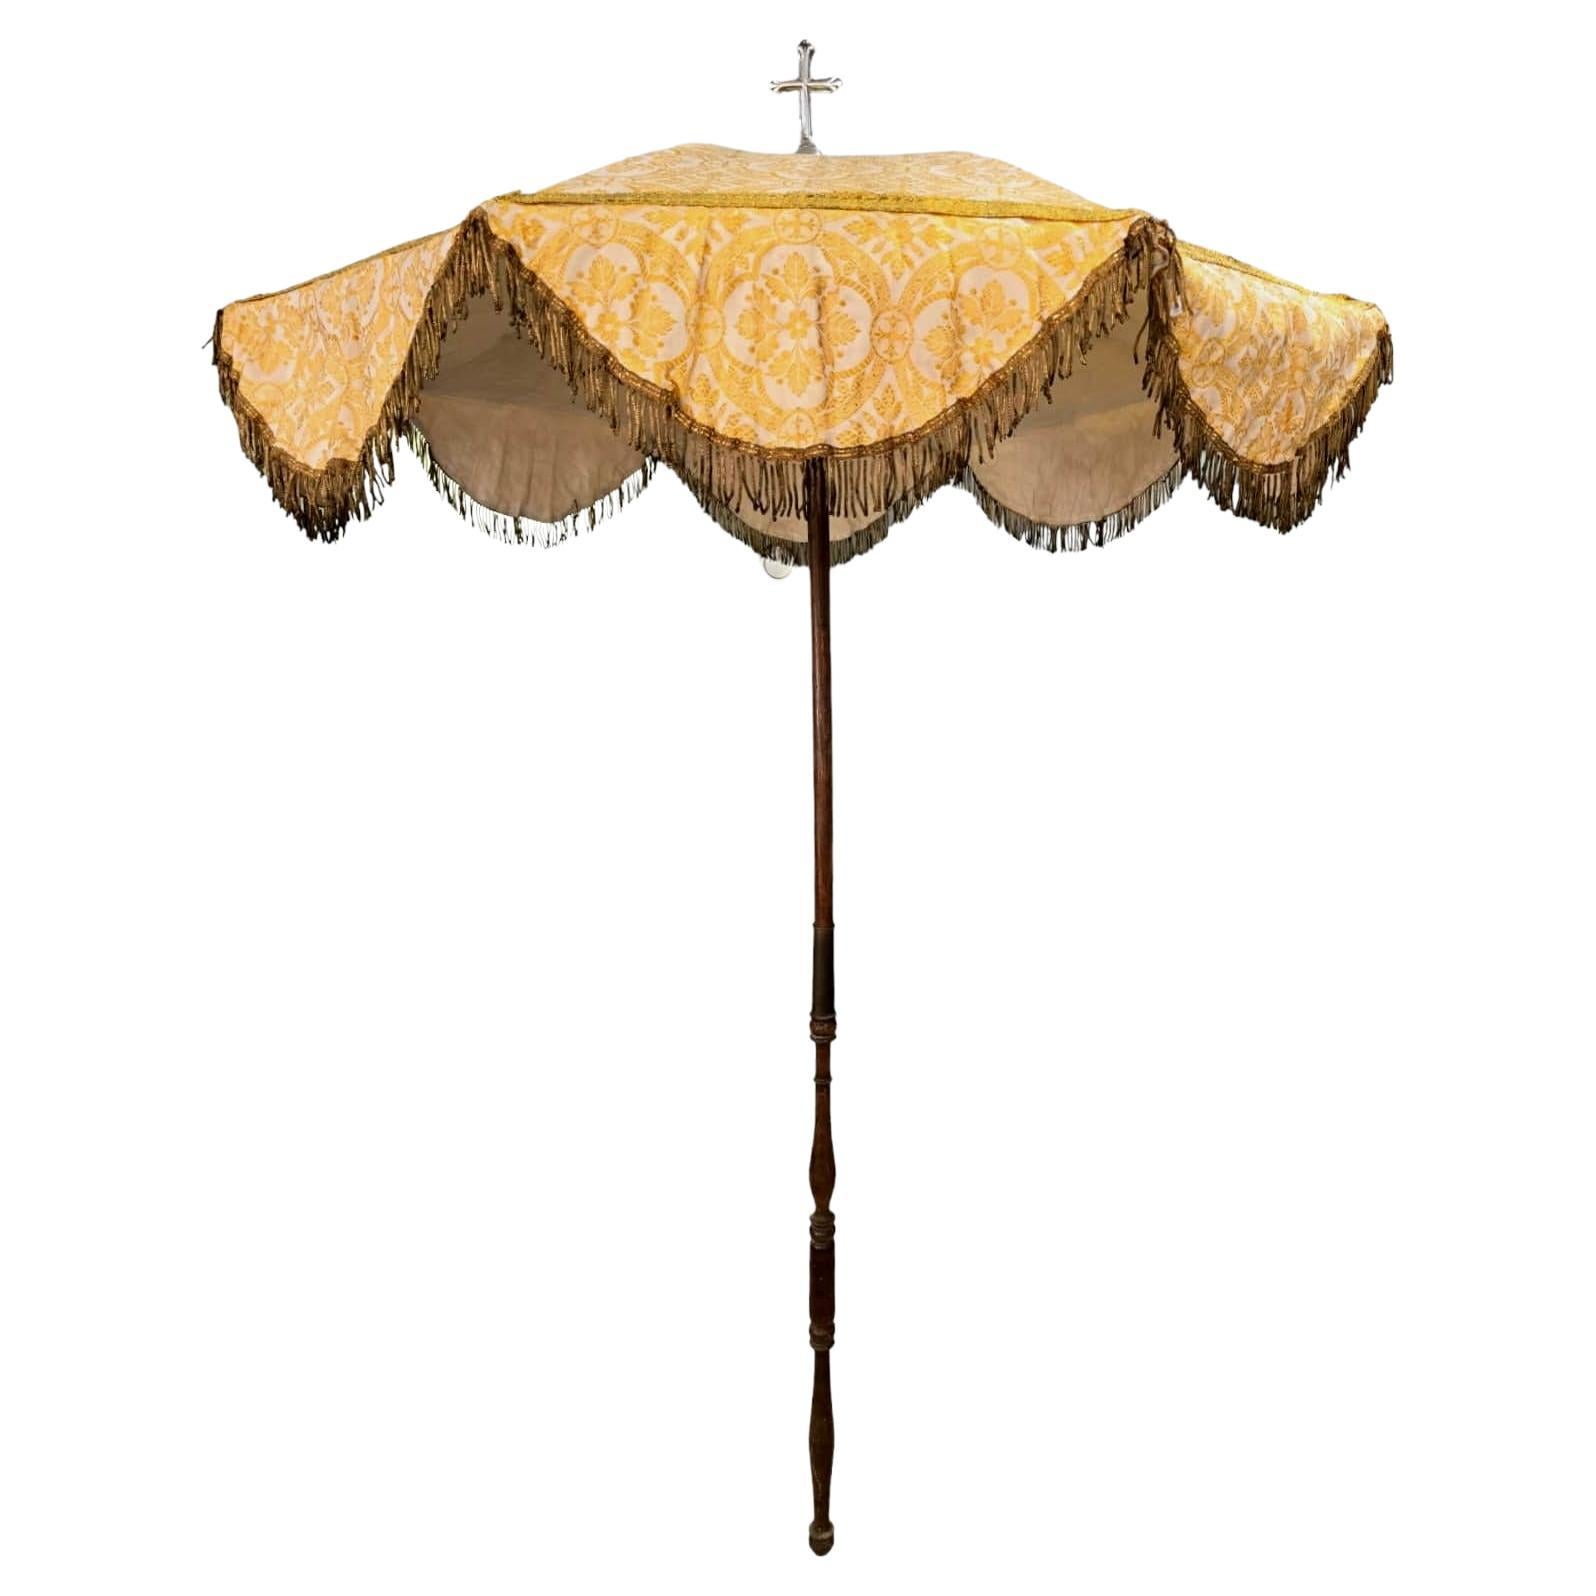  19th Century Religious Silver Parasol with Cross